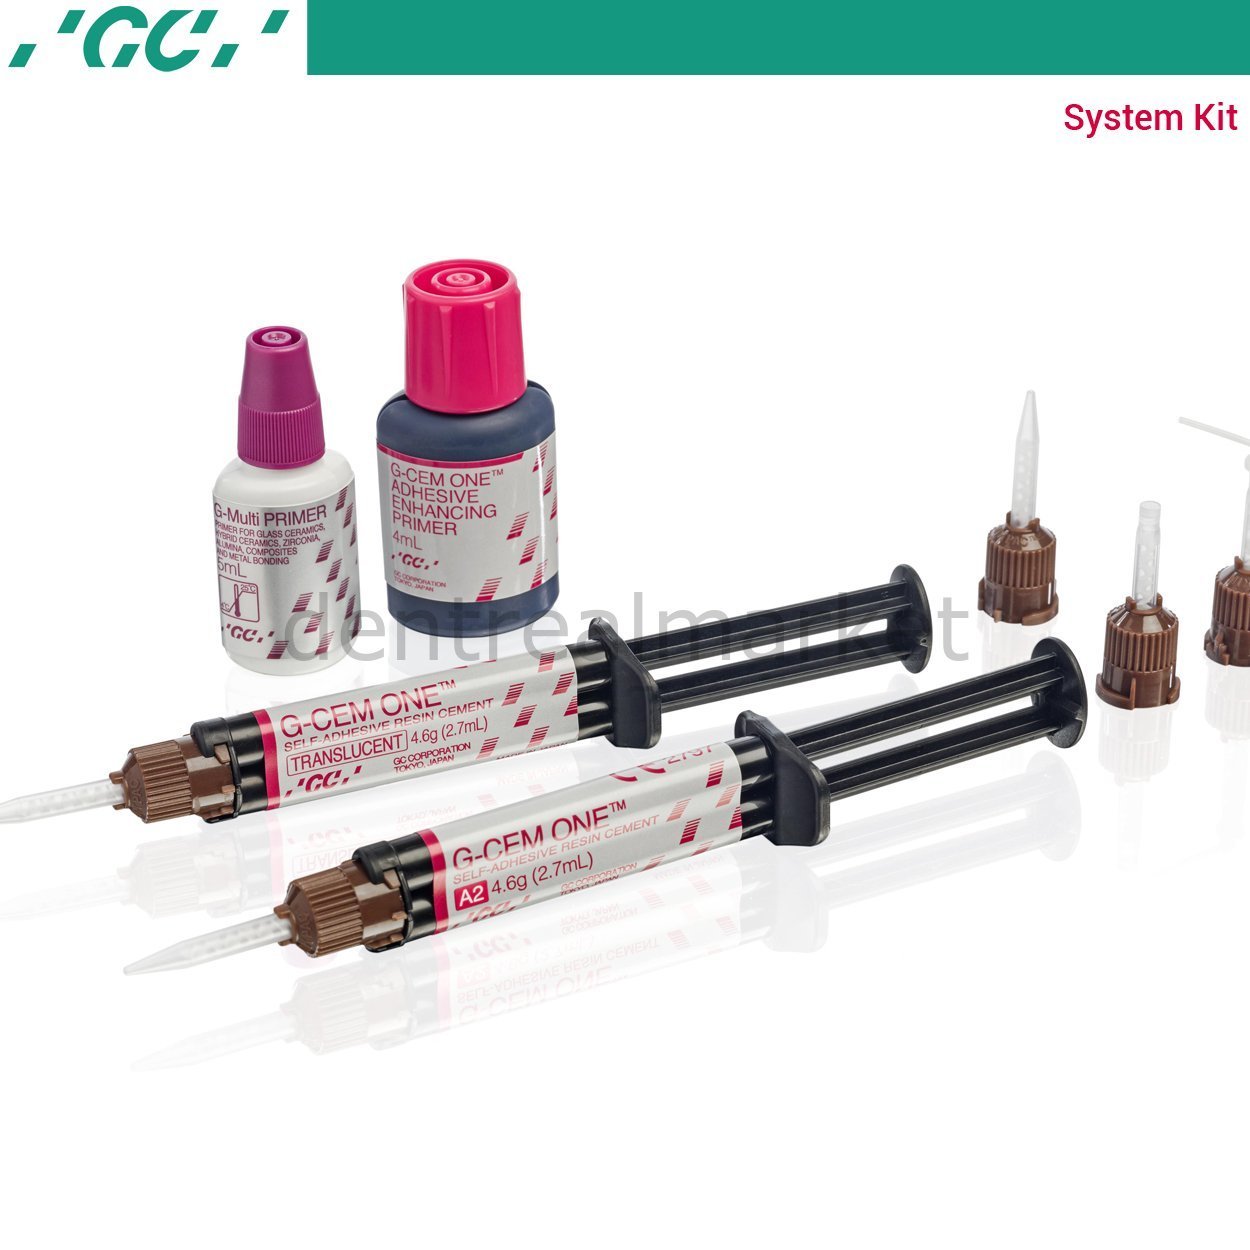 G-Cem ONE System Kit - Self Adhesive Resin Cement